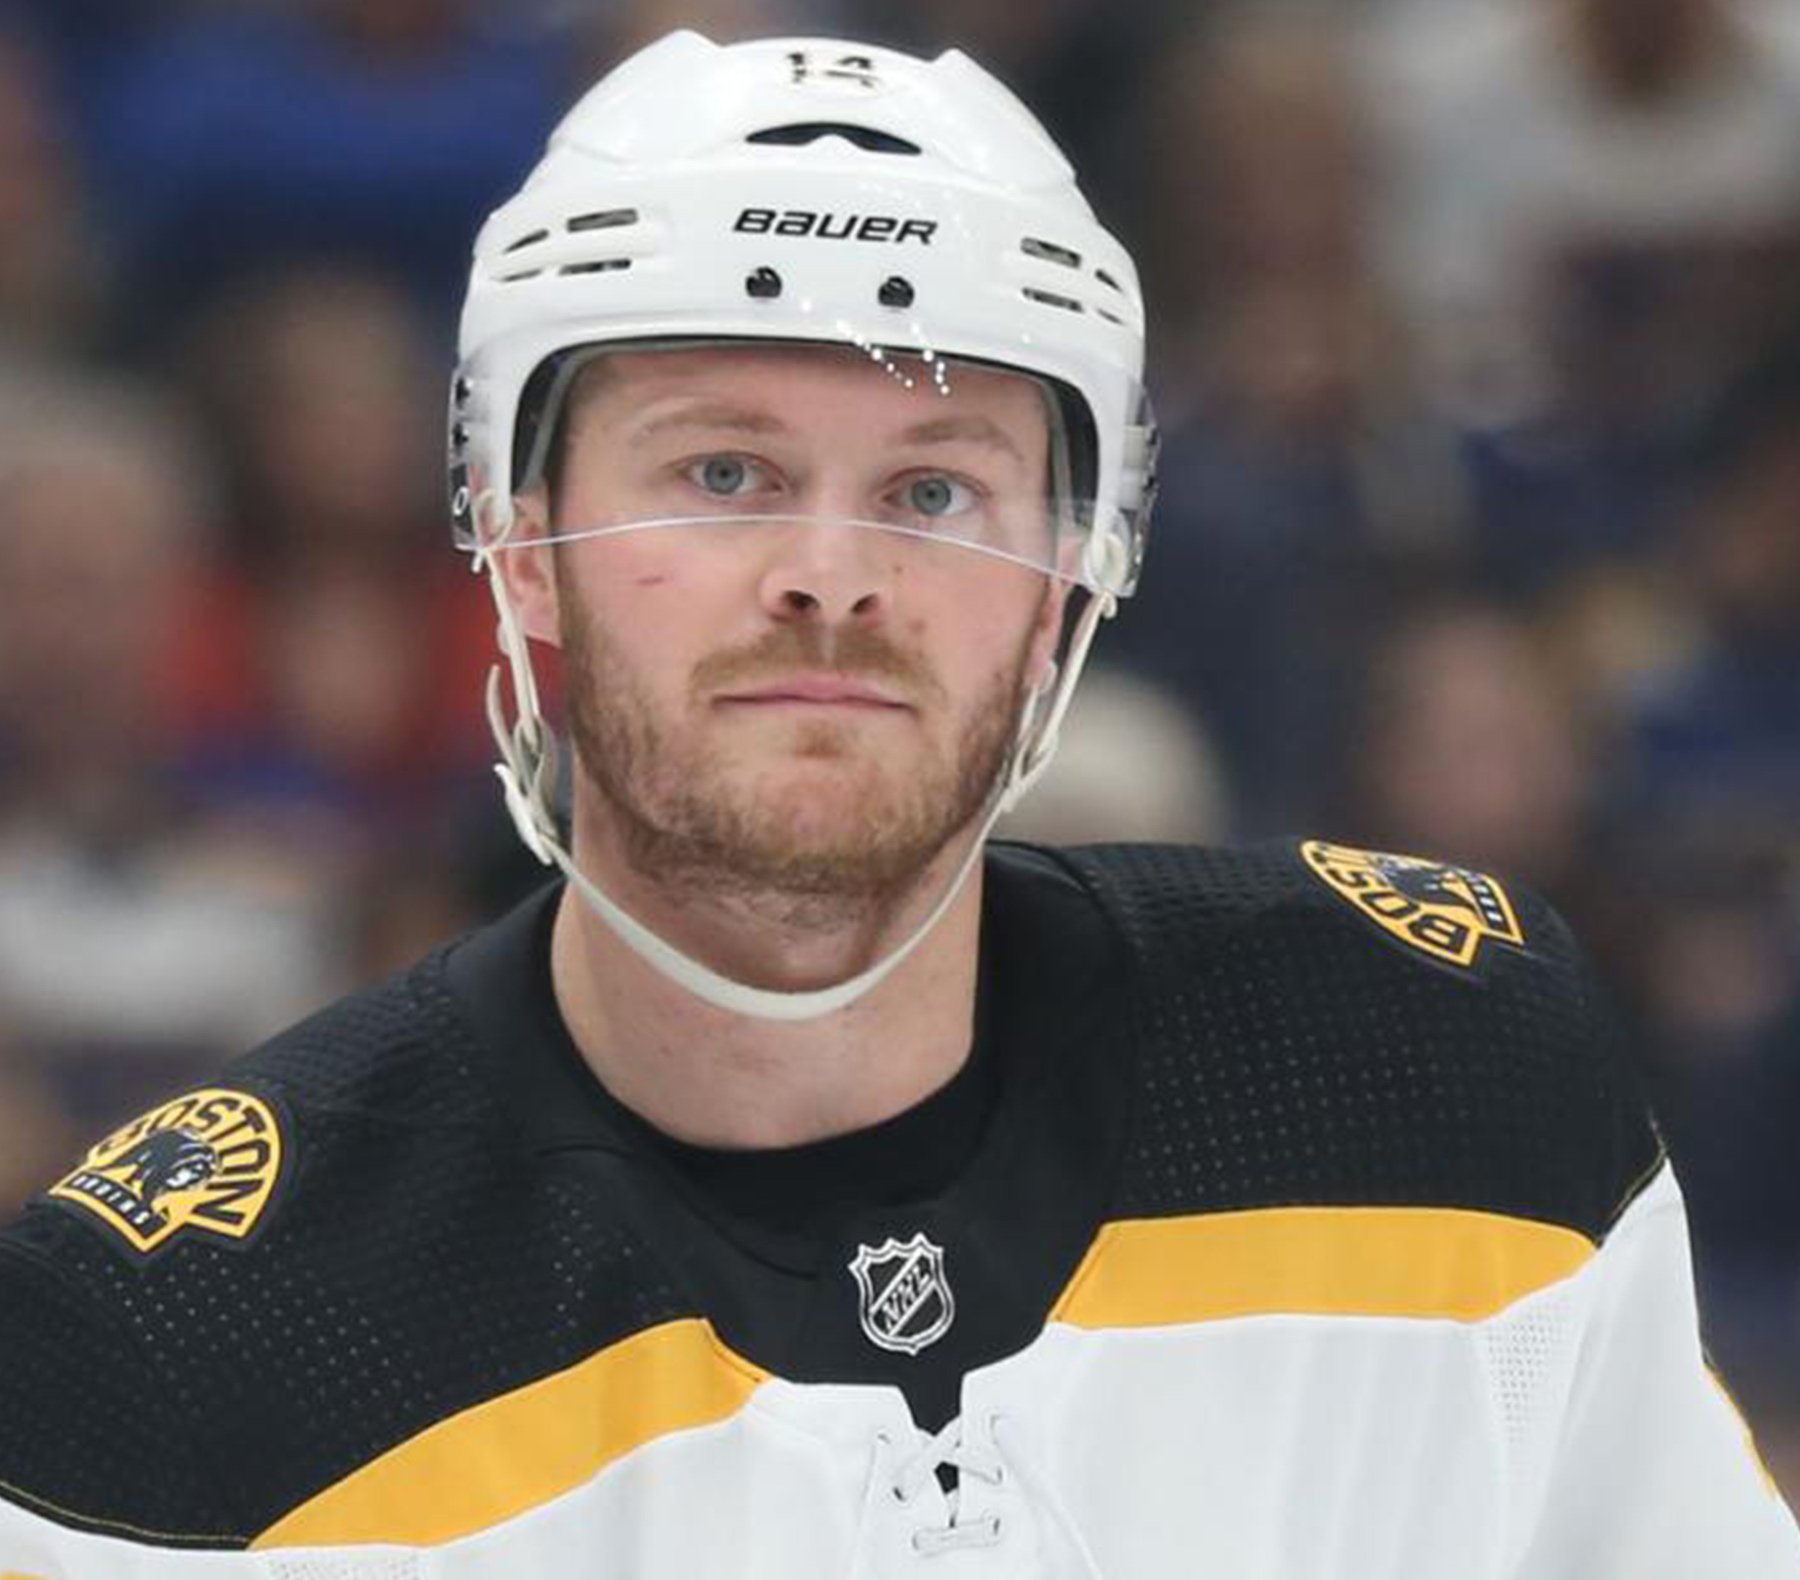 Boston Bruins Forward Chris Wagner to drive pace car in Foxwoods